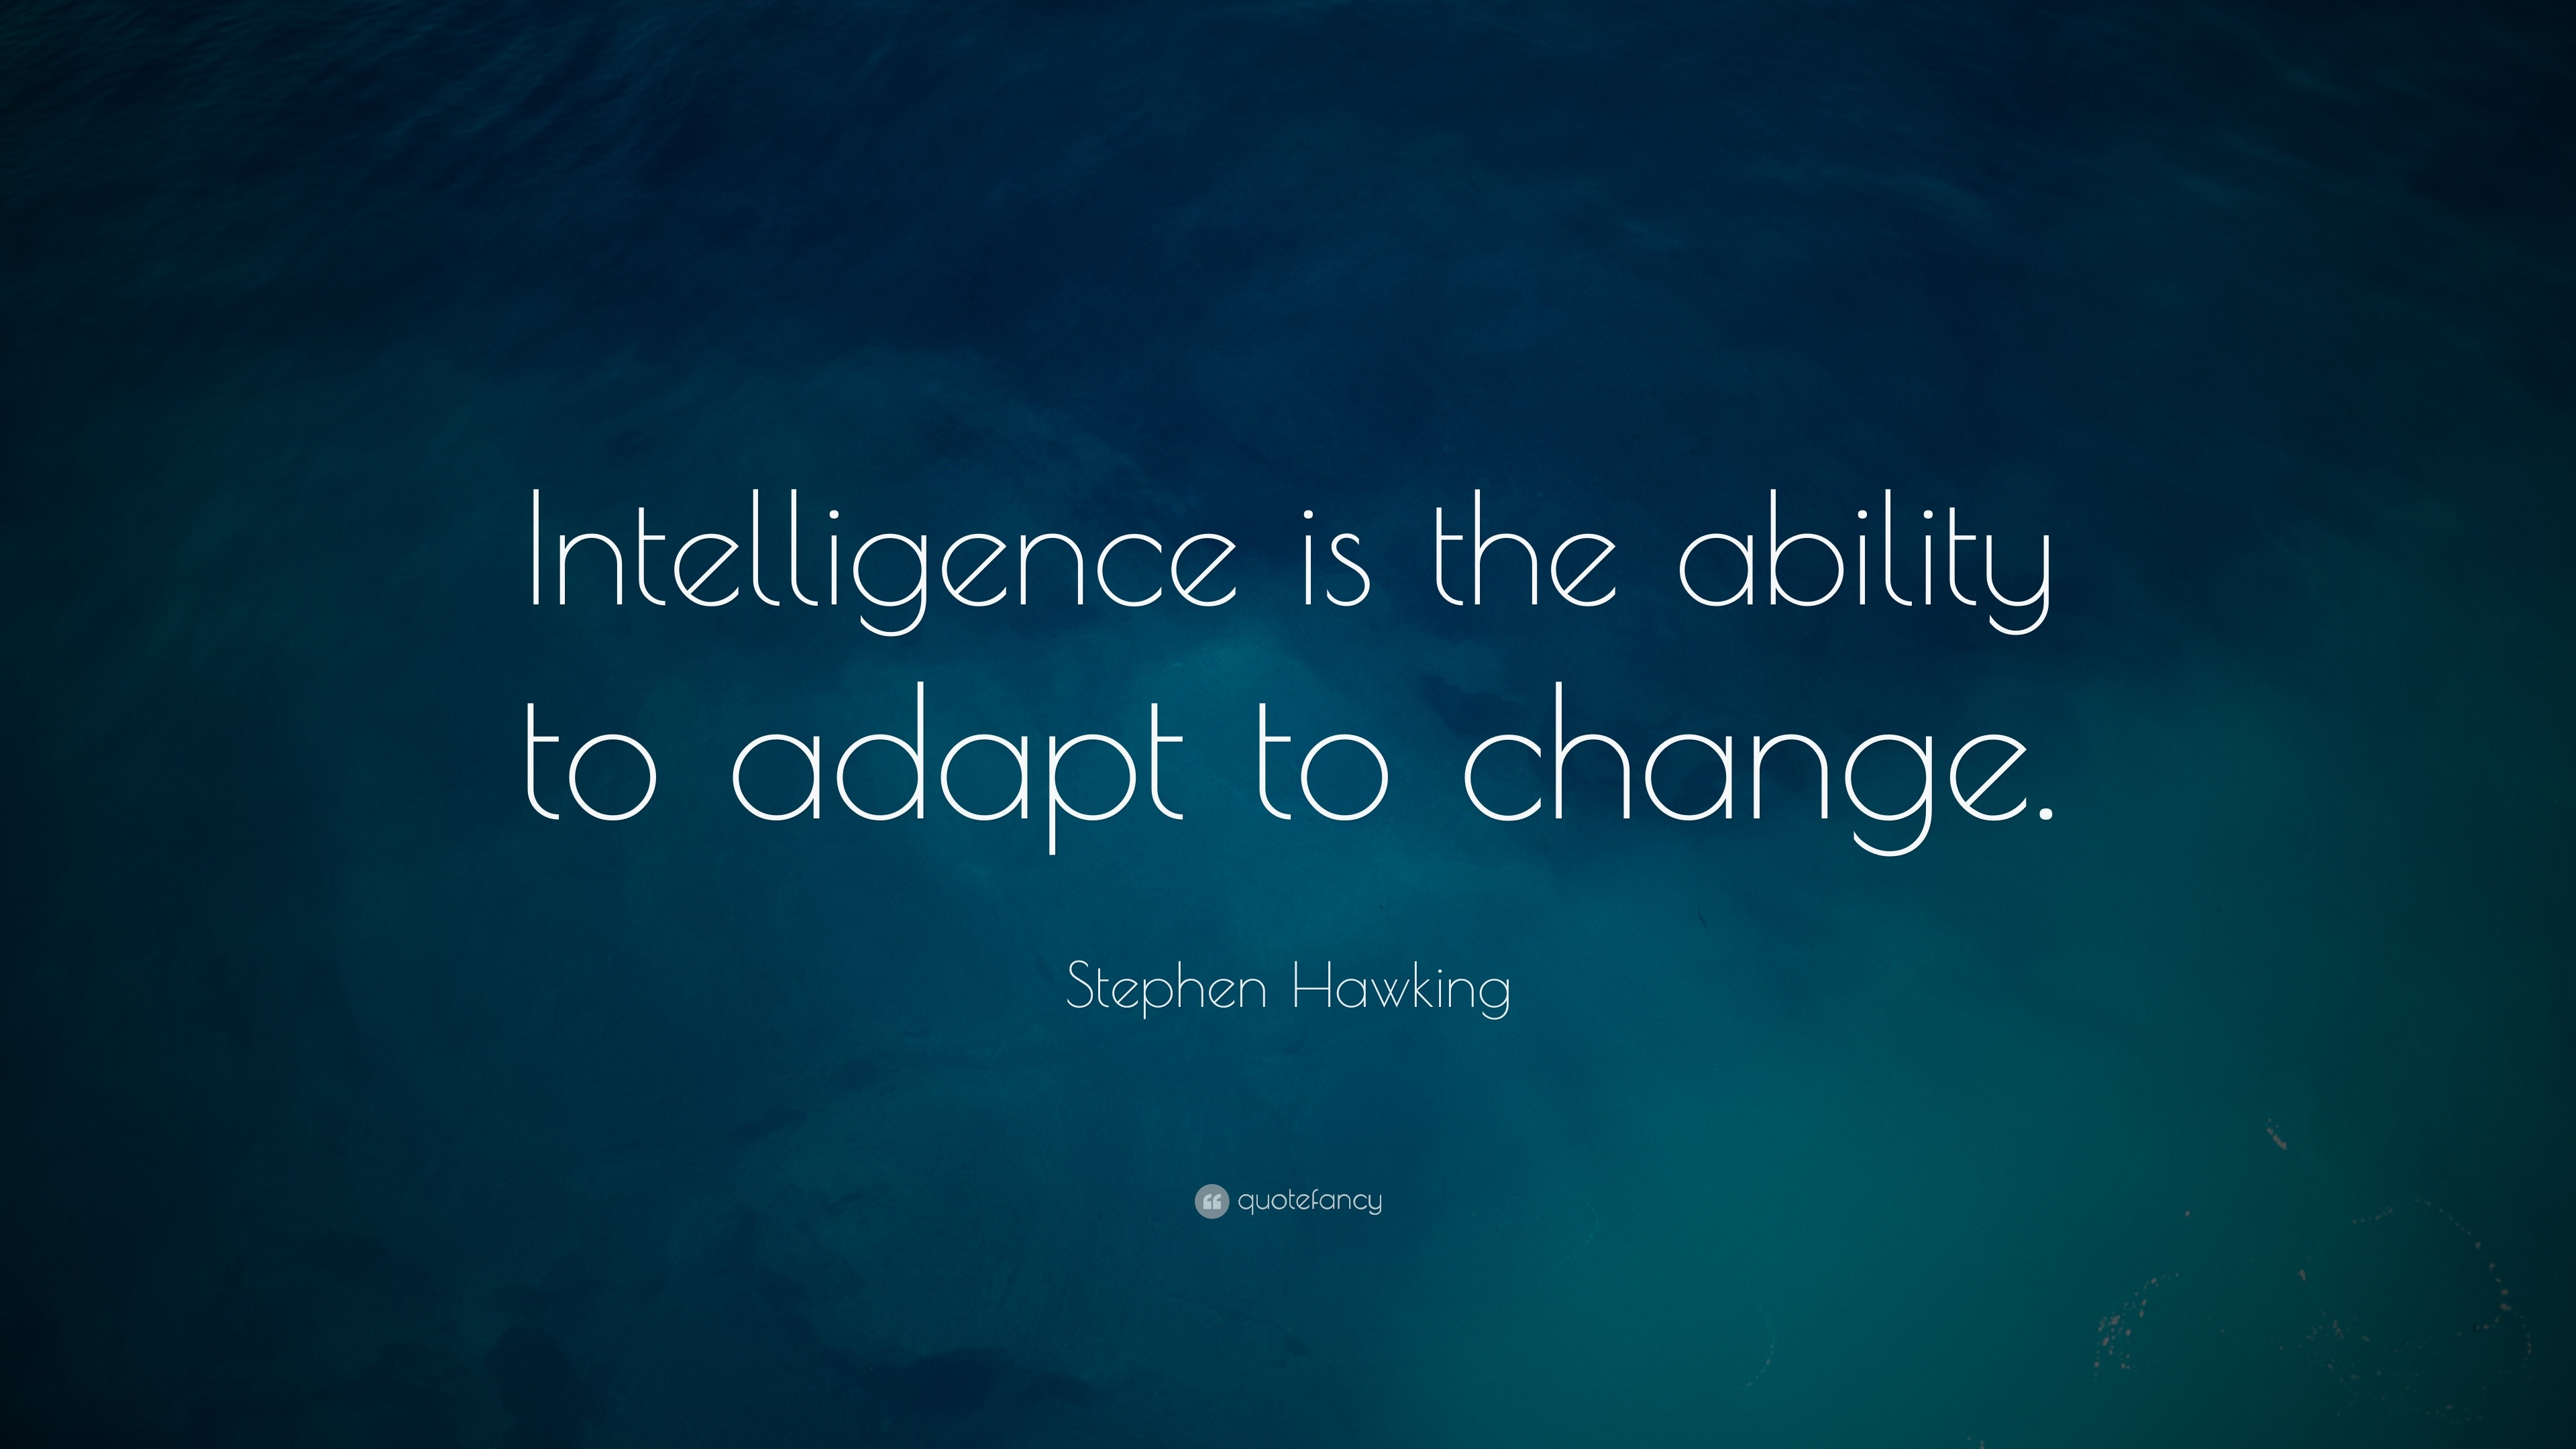 Stephen Hawking Quote: “Intelligence Is The Ability To Adapt To Change